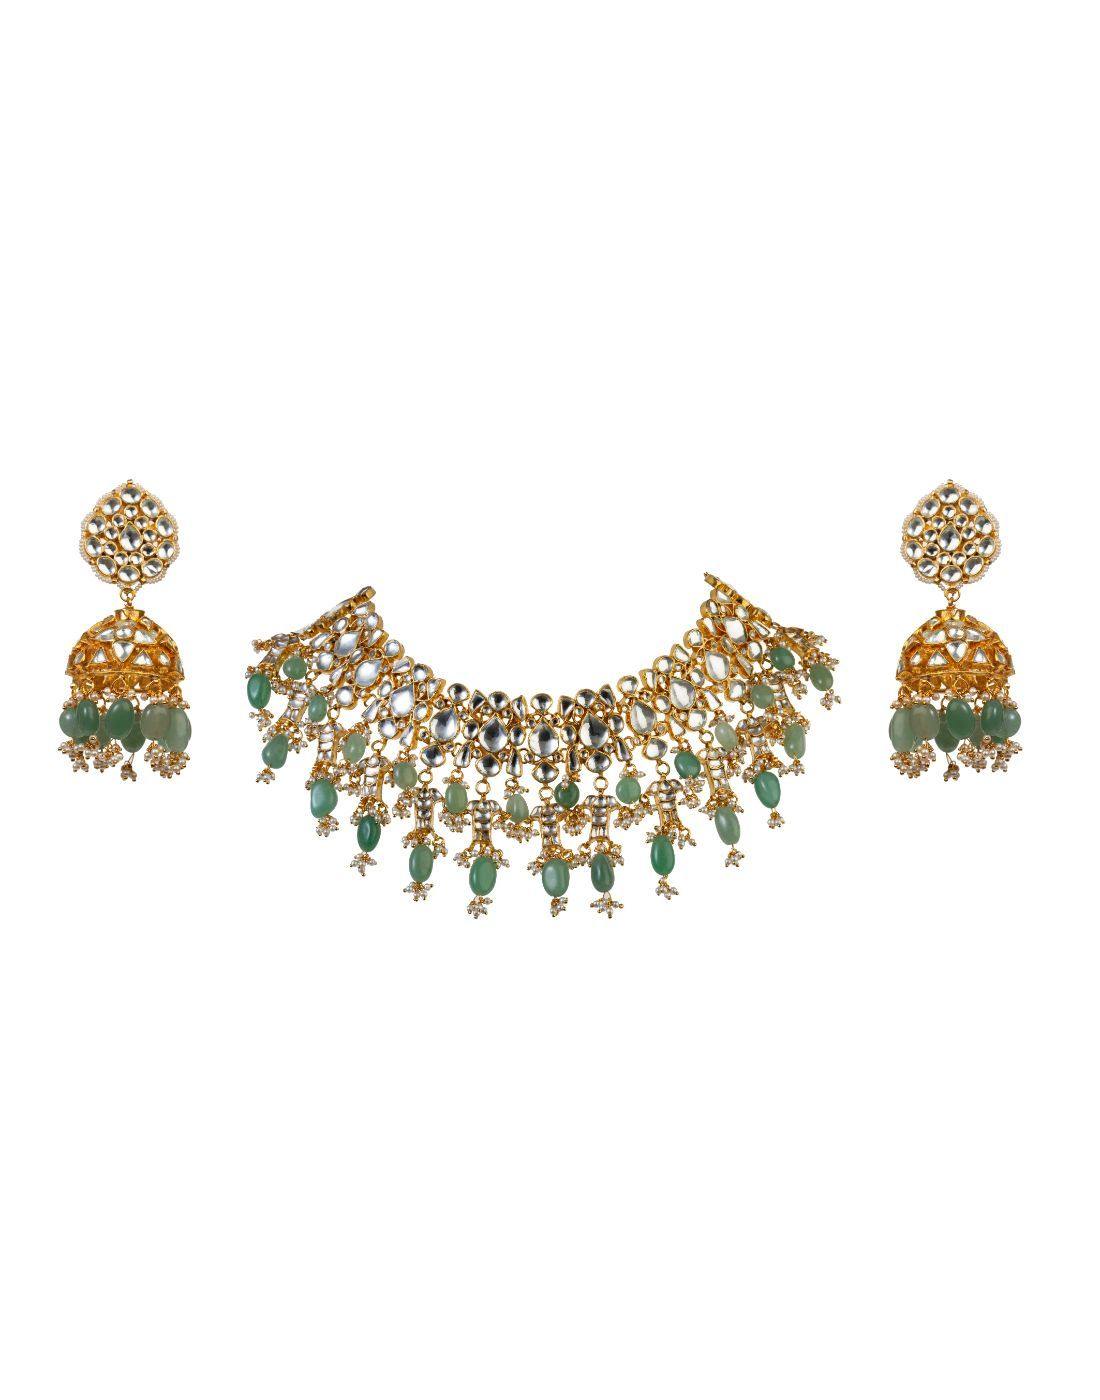 Share more than 116 green necklace and earring set latest